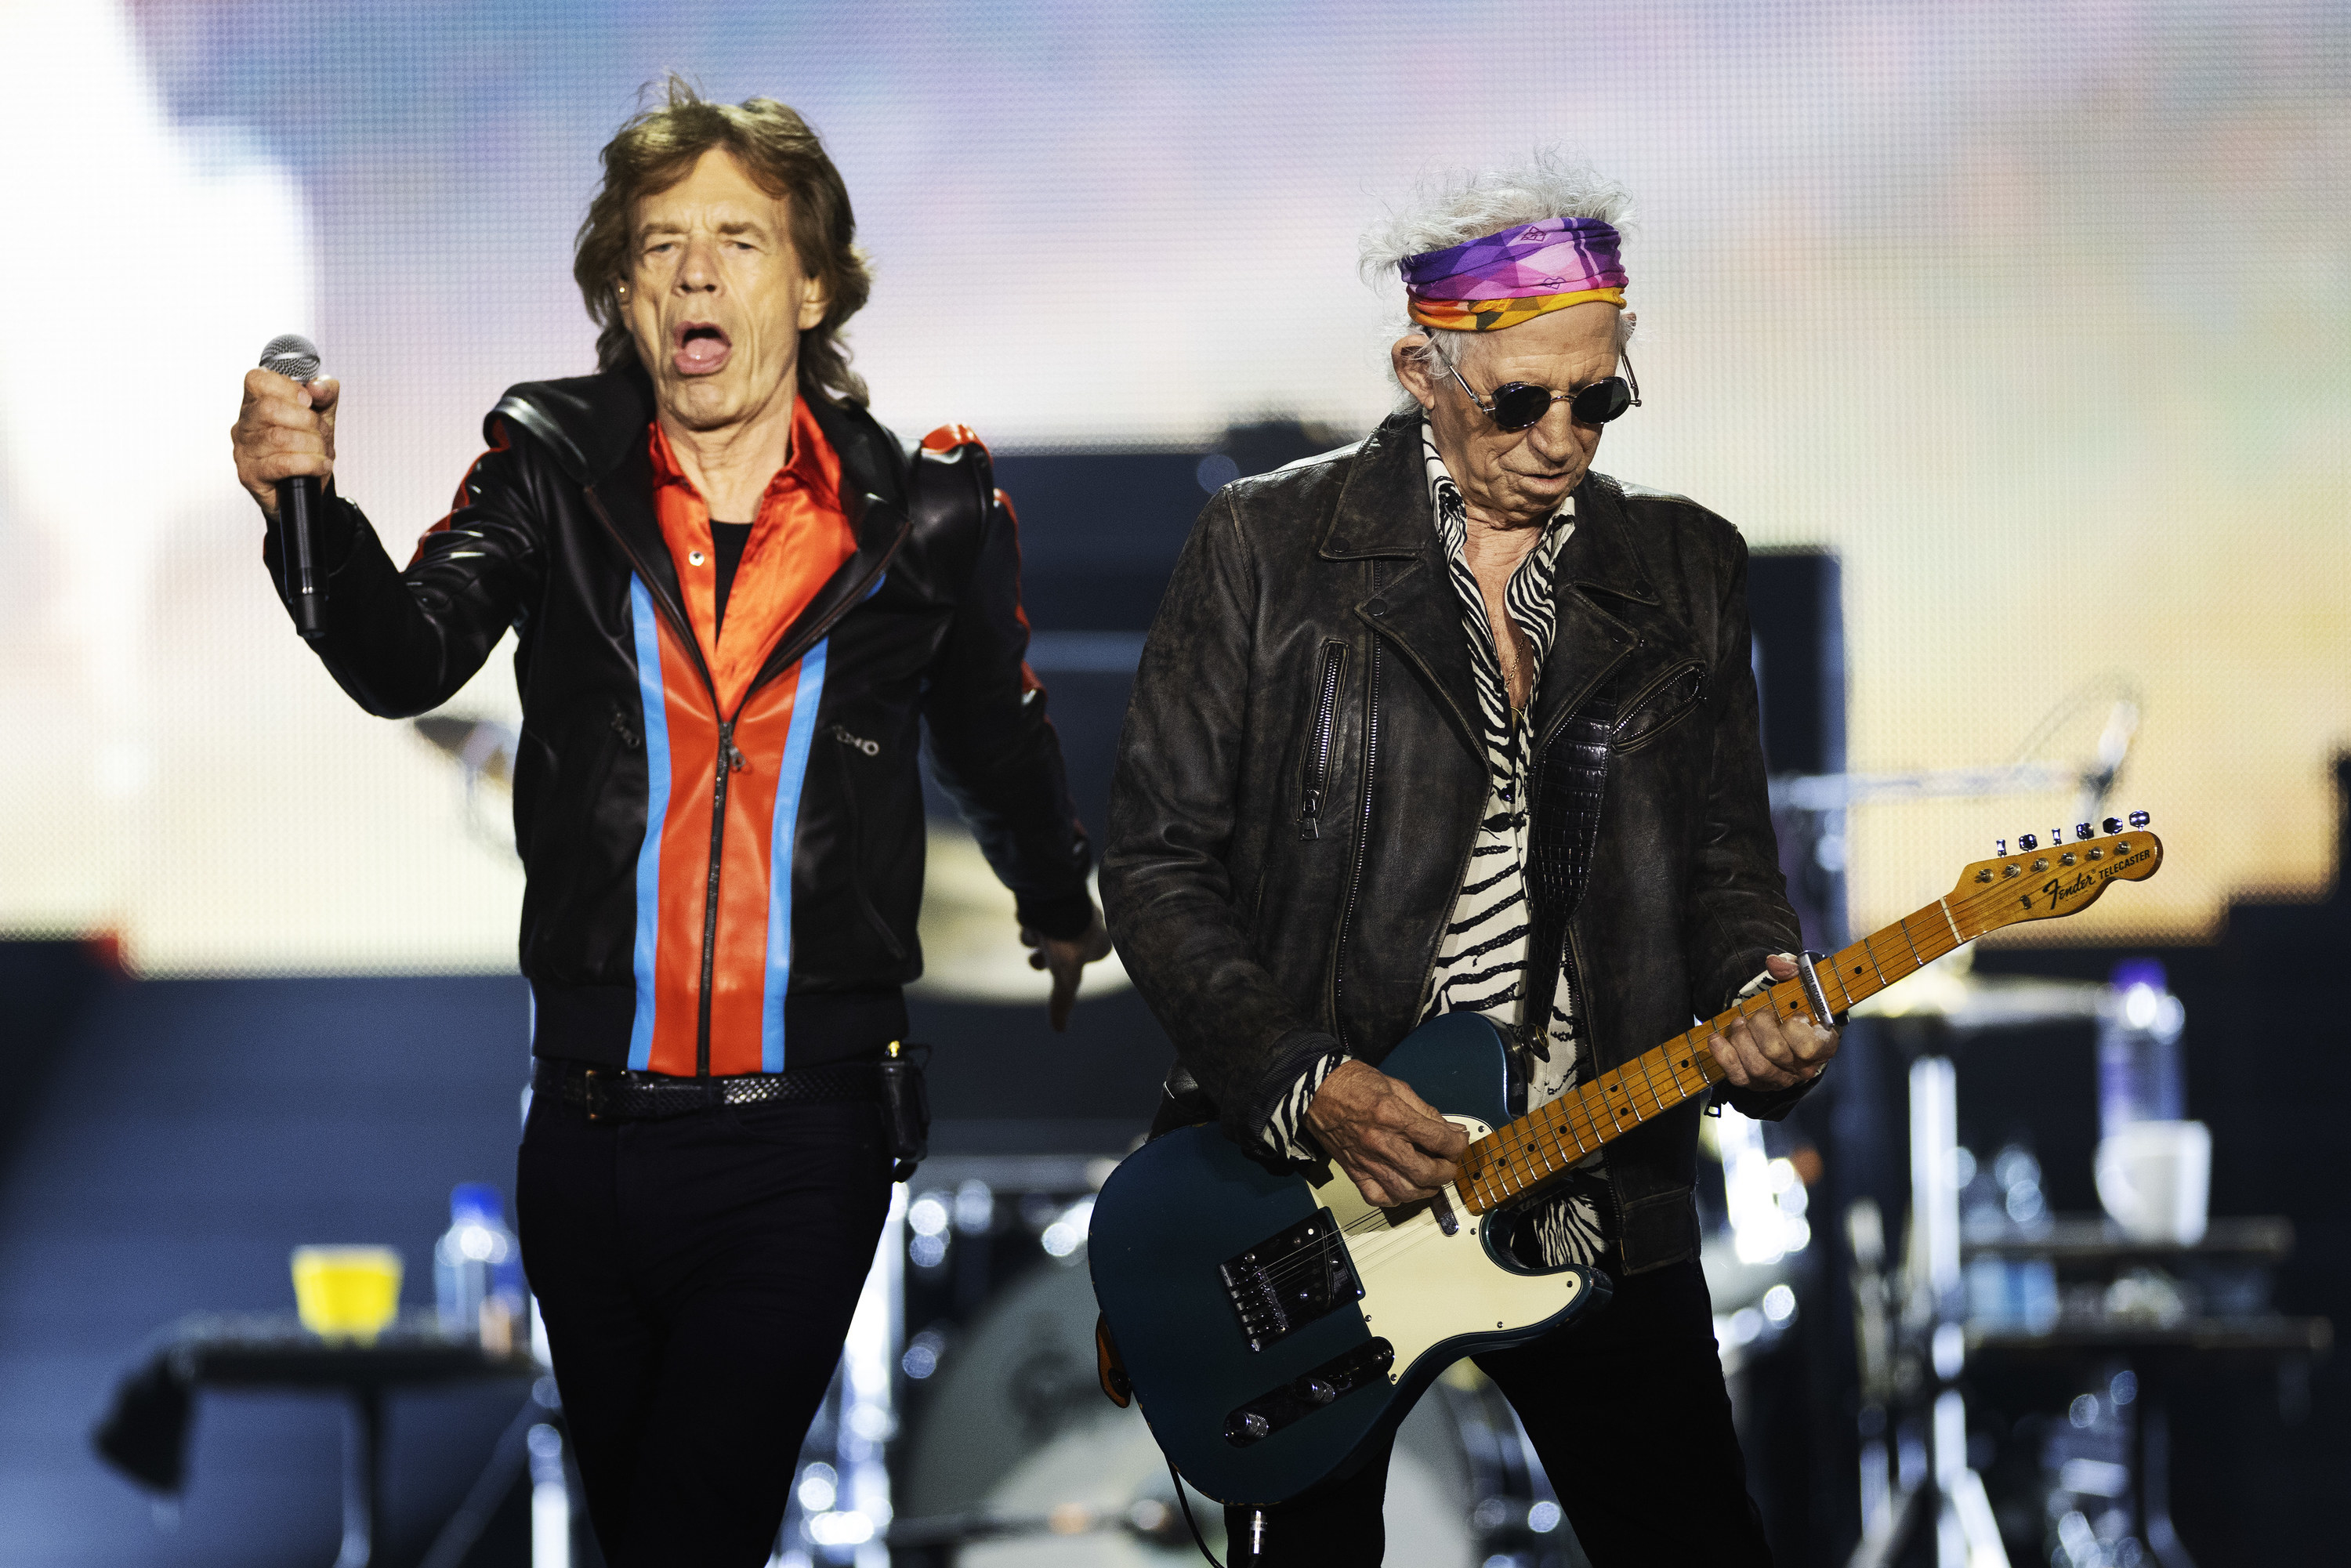 Jagger onstage performing with Keith Richards